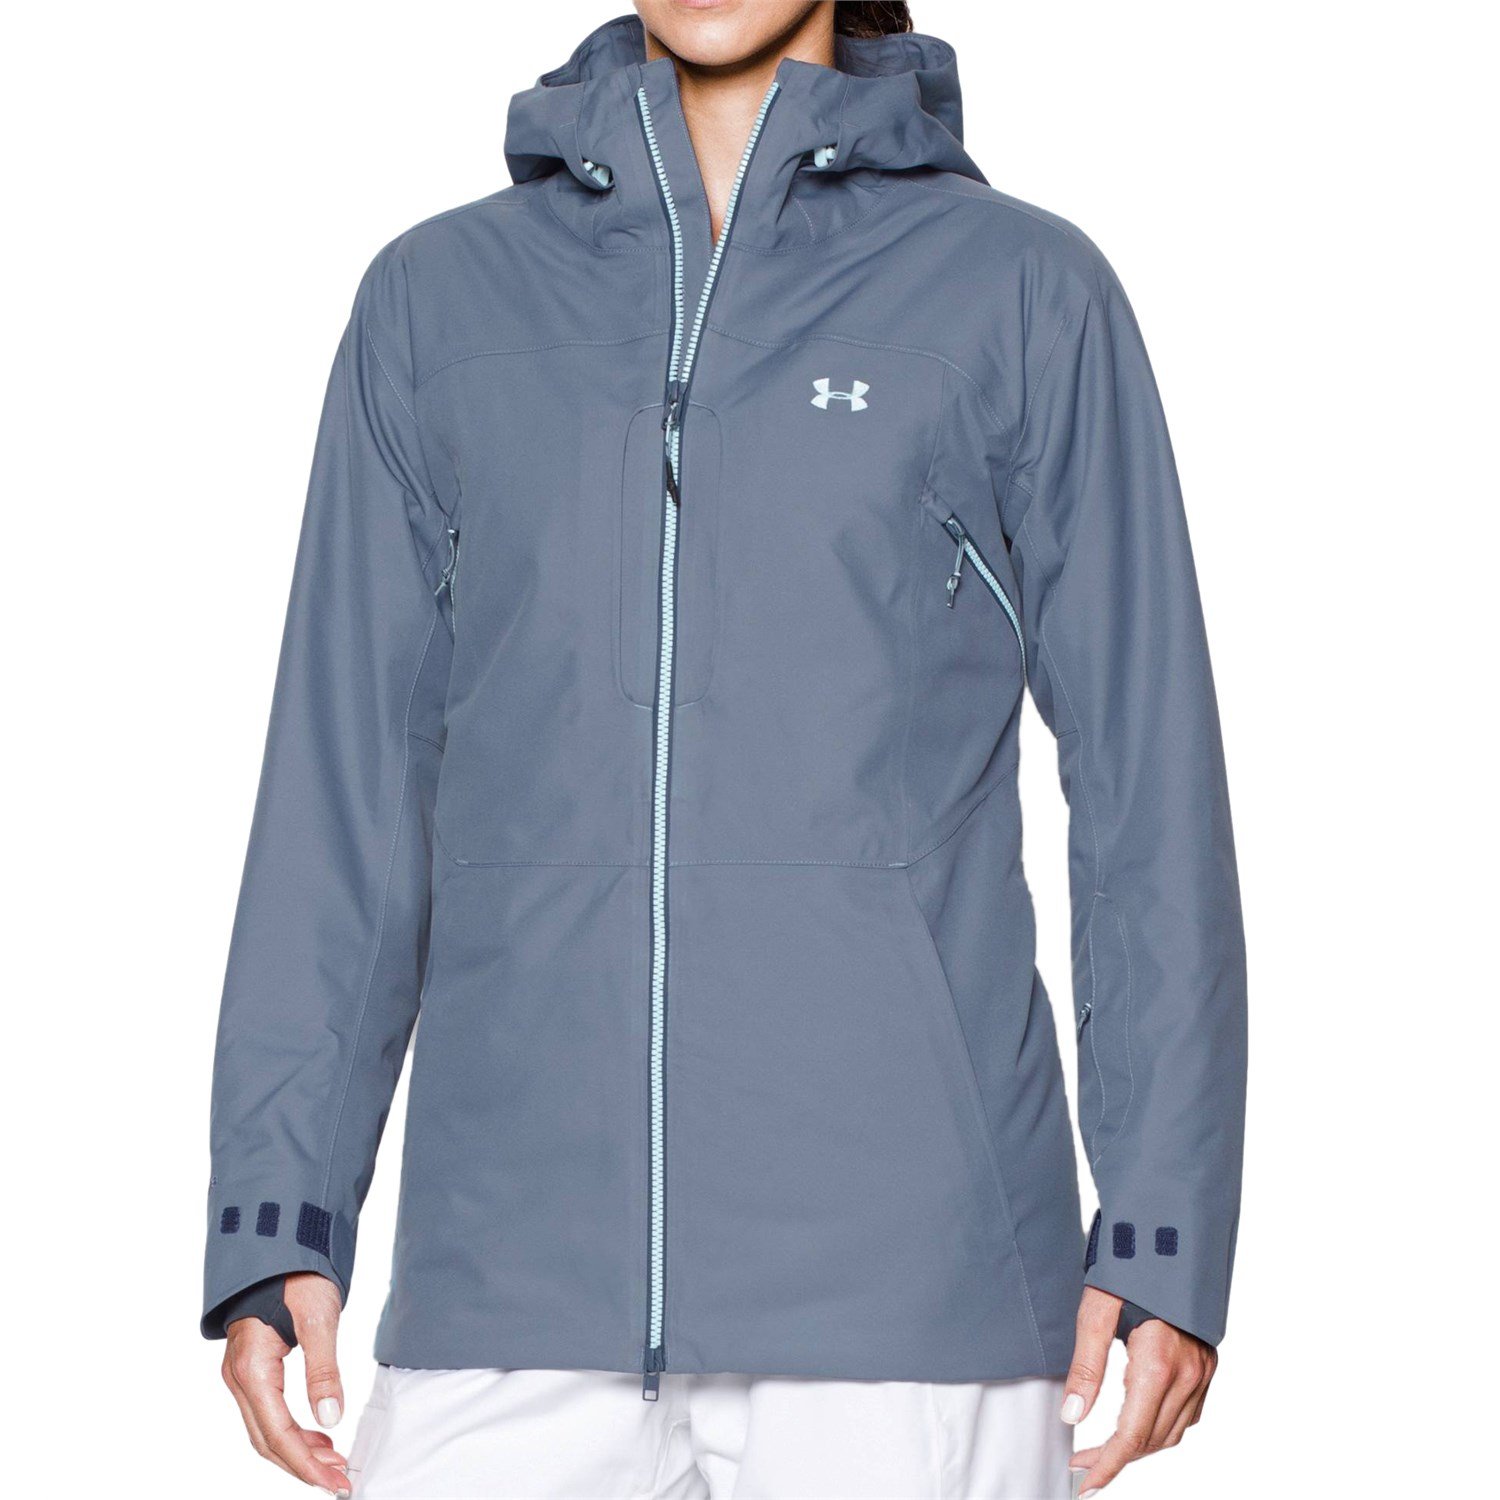 Cheap under armor cage jacket Buy 